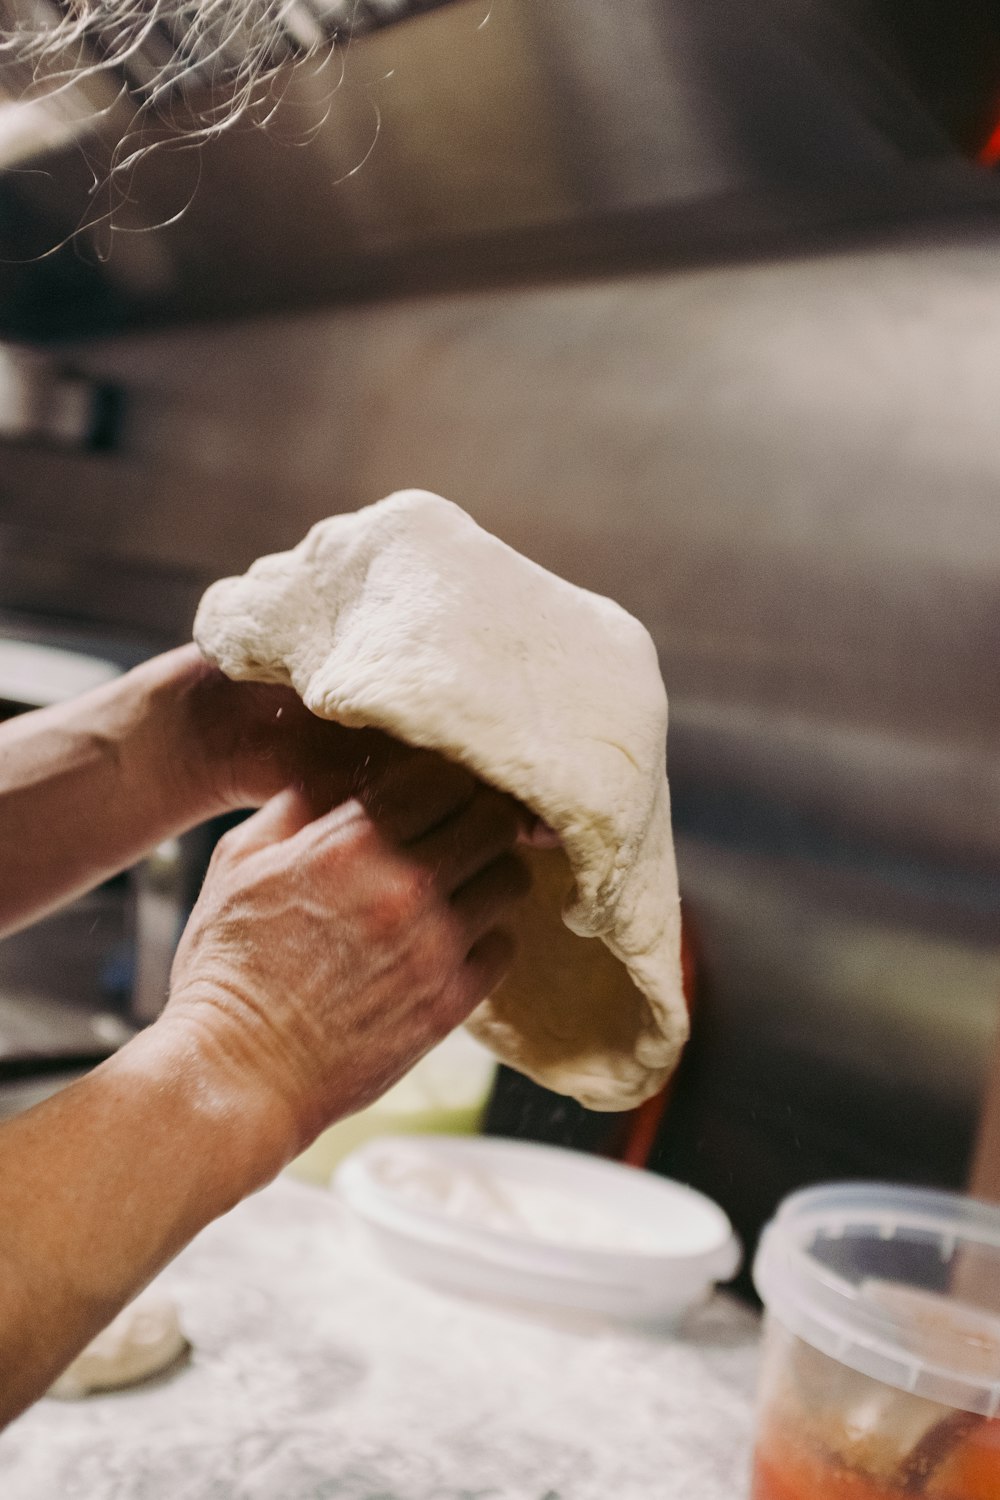 a person is kneading dough in a kitchen